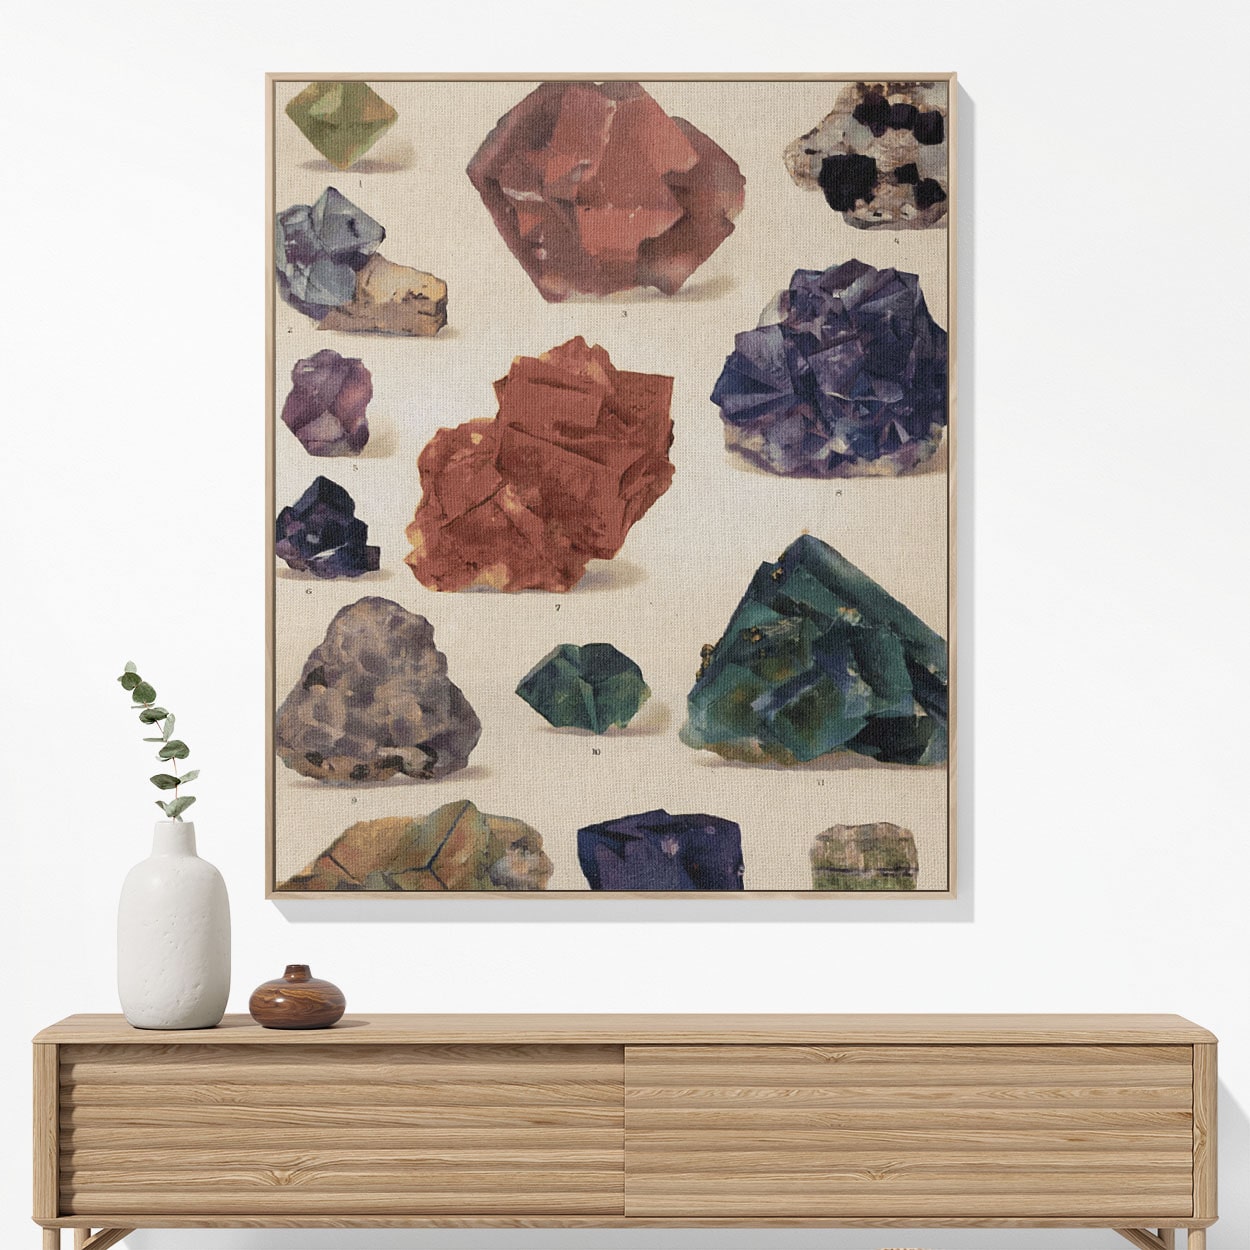 Raw Colorful Gemstones Woven Blanket Woven Blanket Hanging on a Wall as Framed Wall Art